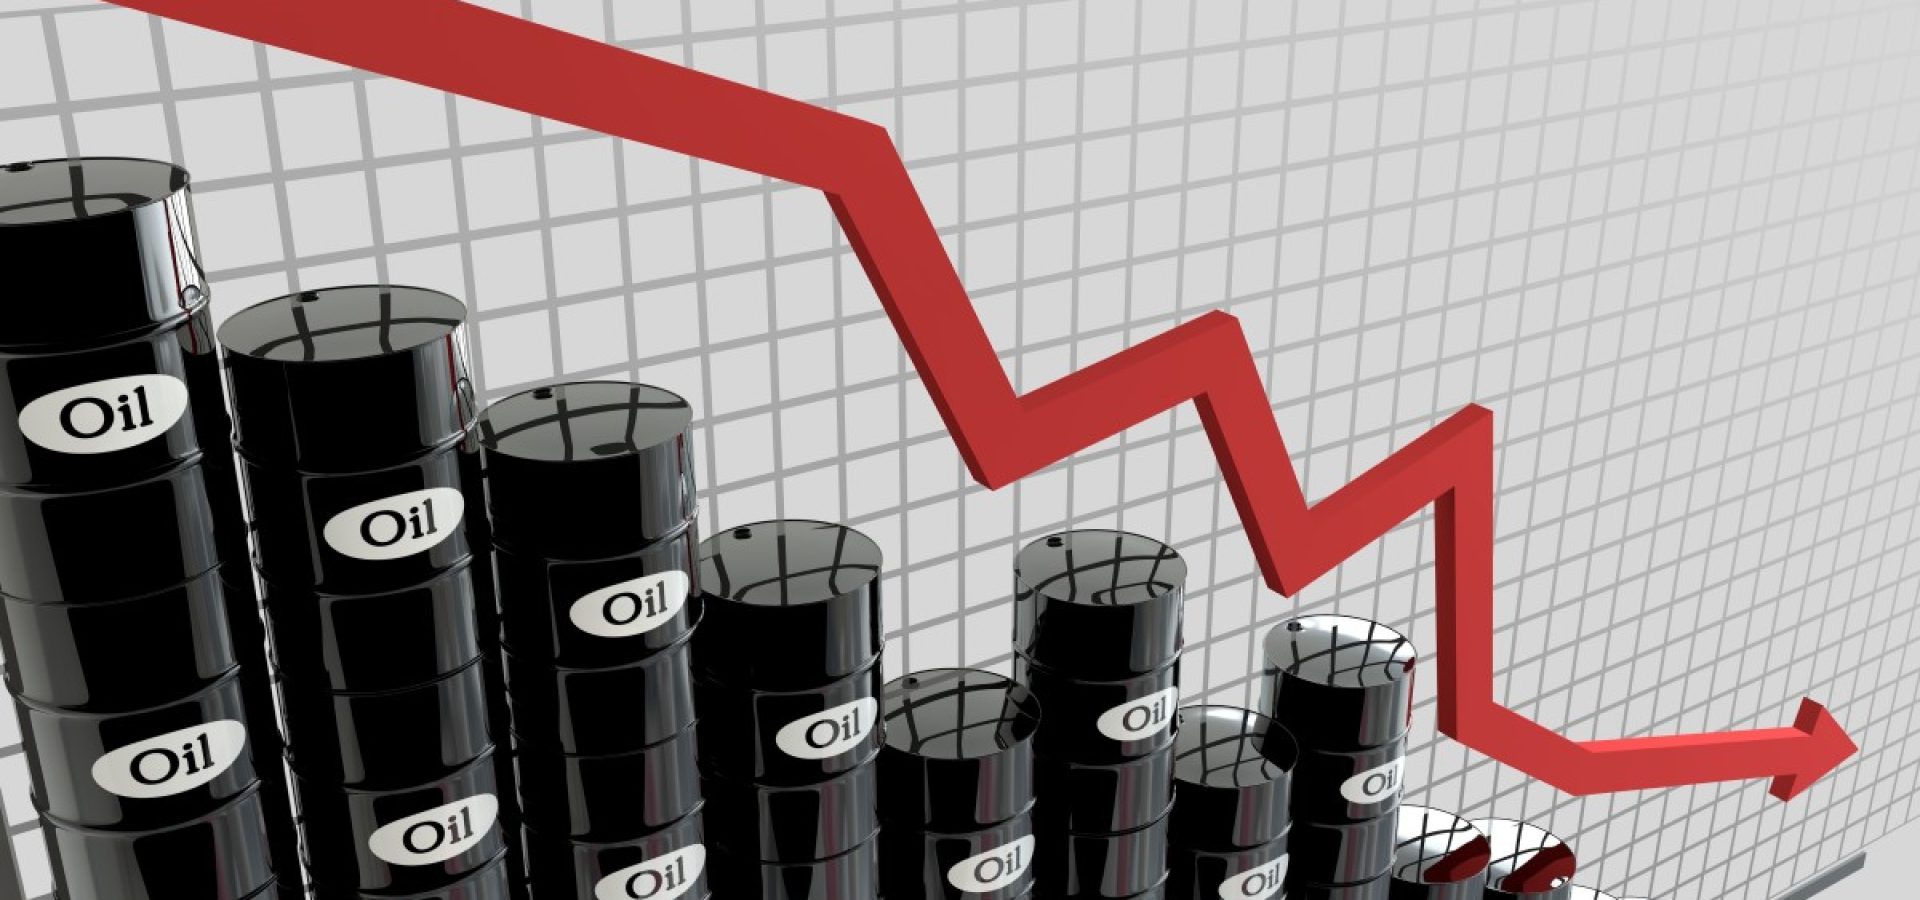 The decline in oil demand is a new phenomenon in the global markets